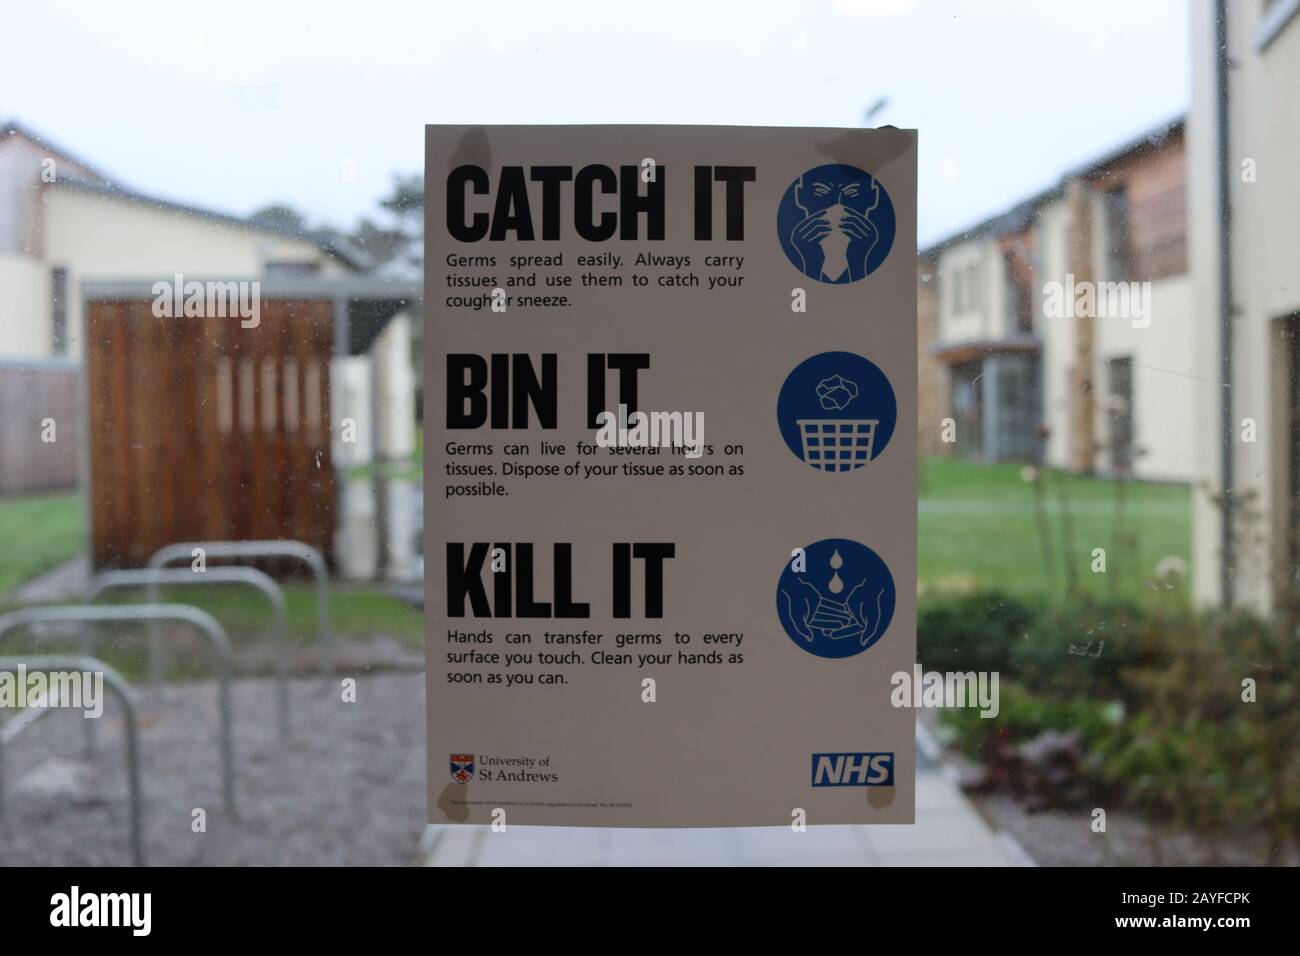 ST ANDREWS, SCOTLAND - 15/2/2020 - Health information displayed in University of St. Andrews halls due to the recent novel Coronavirus outbreak Stock Photo